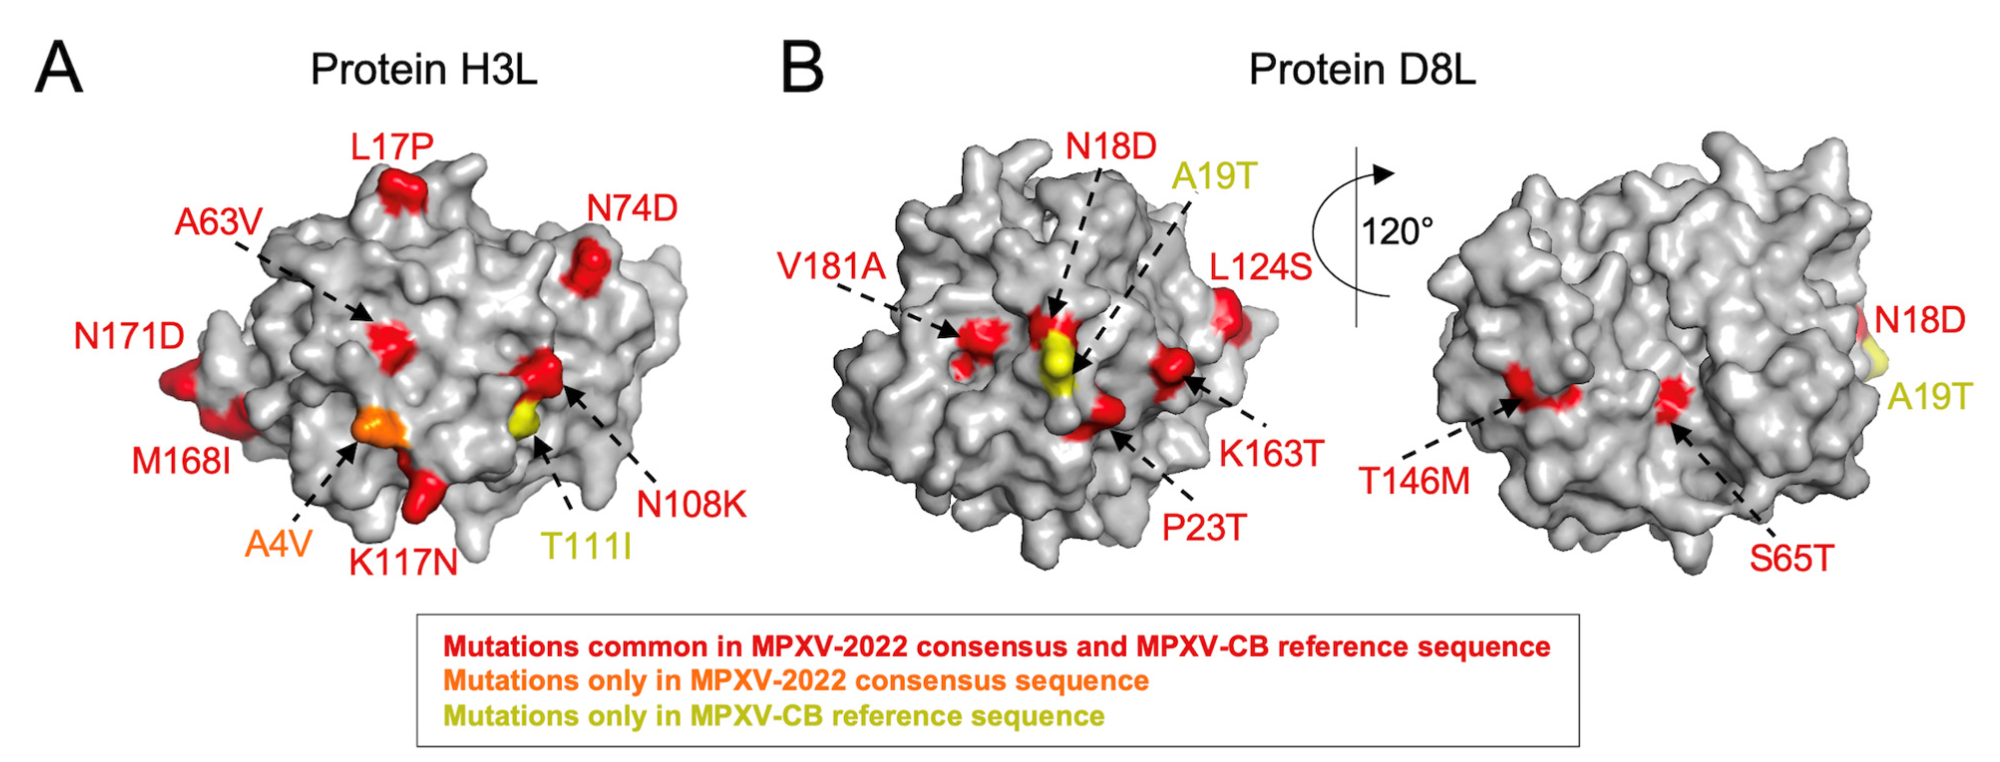 Mapping mutations observed in MPXV-2022 and MPXV-CB on the structure available for VACV (A) H3L [PDB ID: 5EJ0] and (B) D8L [PDB ID: 4E9O] surface proteins. The core structure of each protein is shown in gray, while mutations and their labels are colored according to the scheme in the legend.